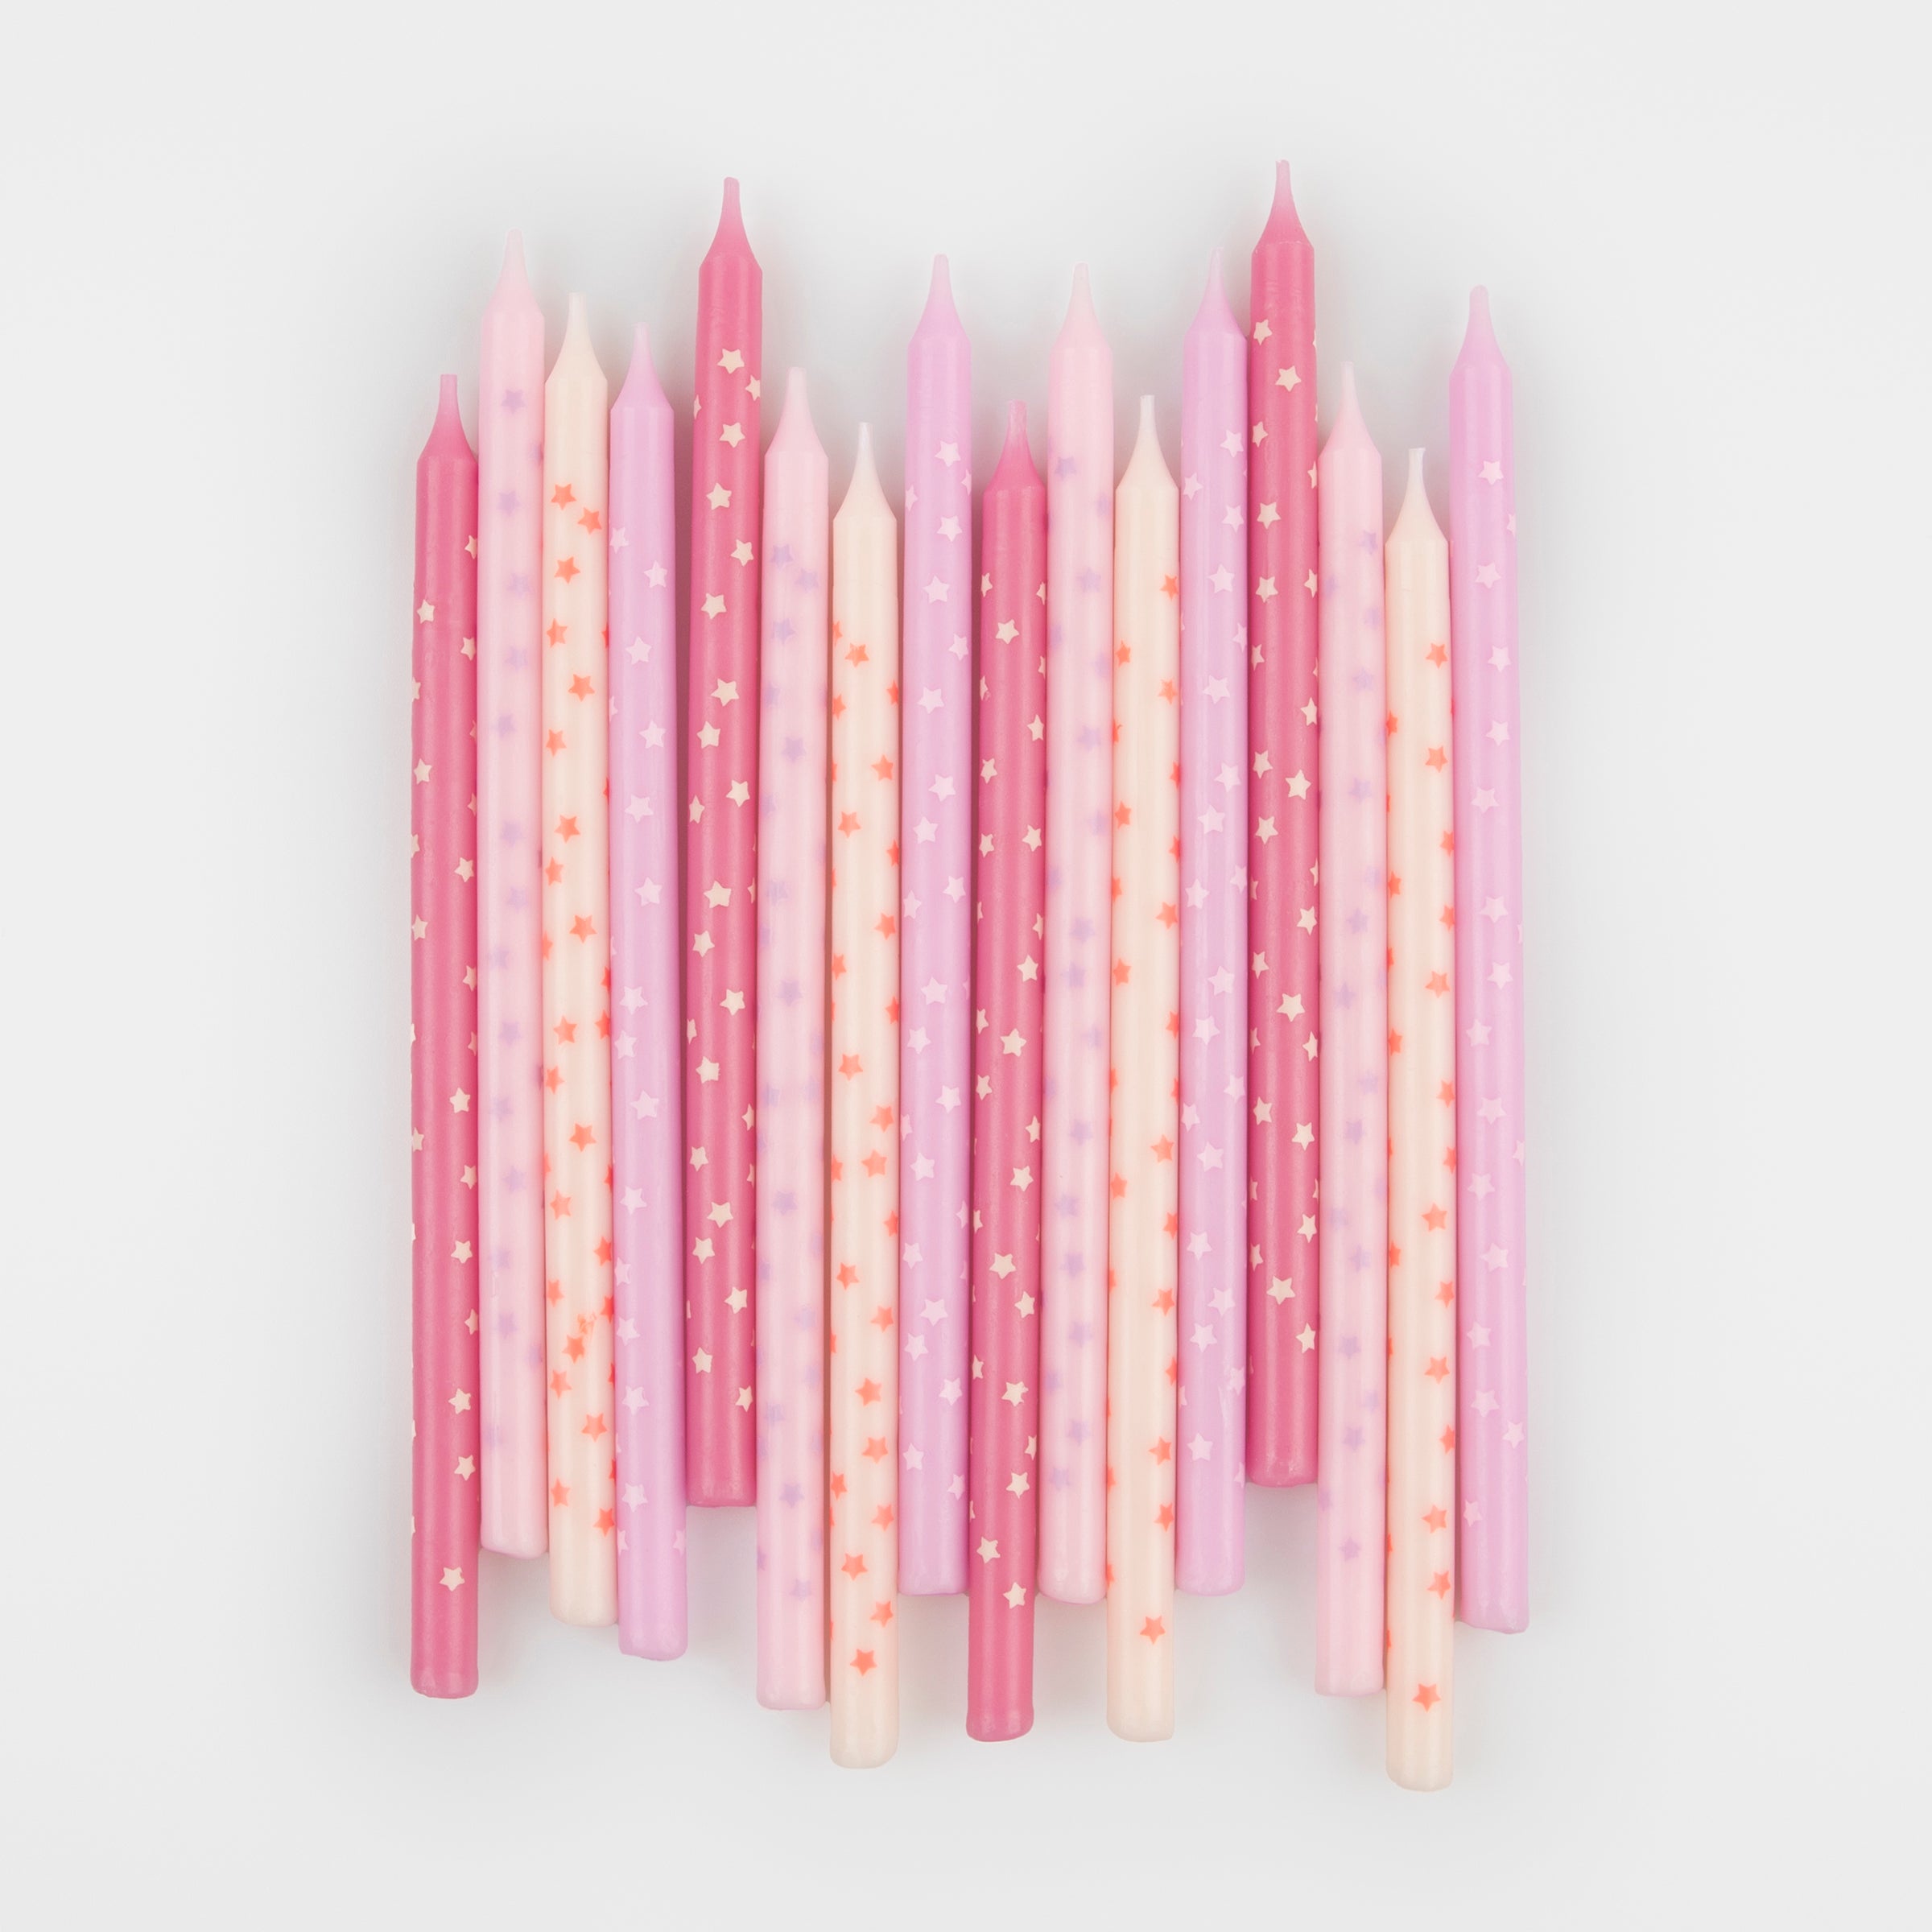 Our pink candles, with star details, are ideal as birthday candles for cakes or cupcakes.